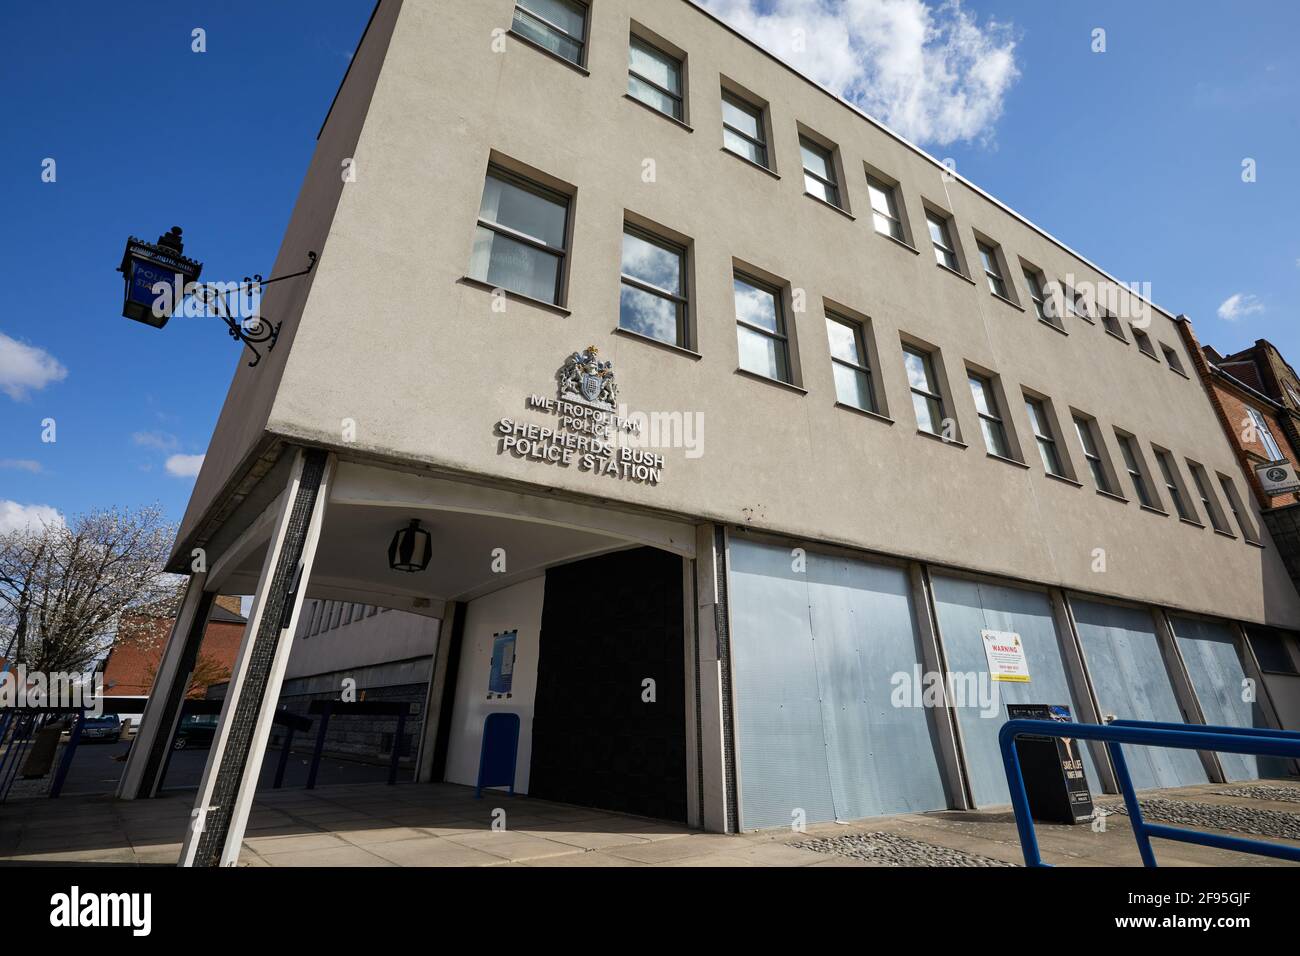 London, UK - 15 Apr 2021: Shepherds Bush police station. Front counter services for the public were recently closed and as a result the ground floor has been boarded-up. Stock Photo